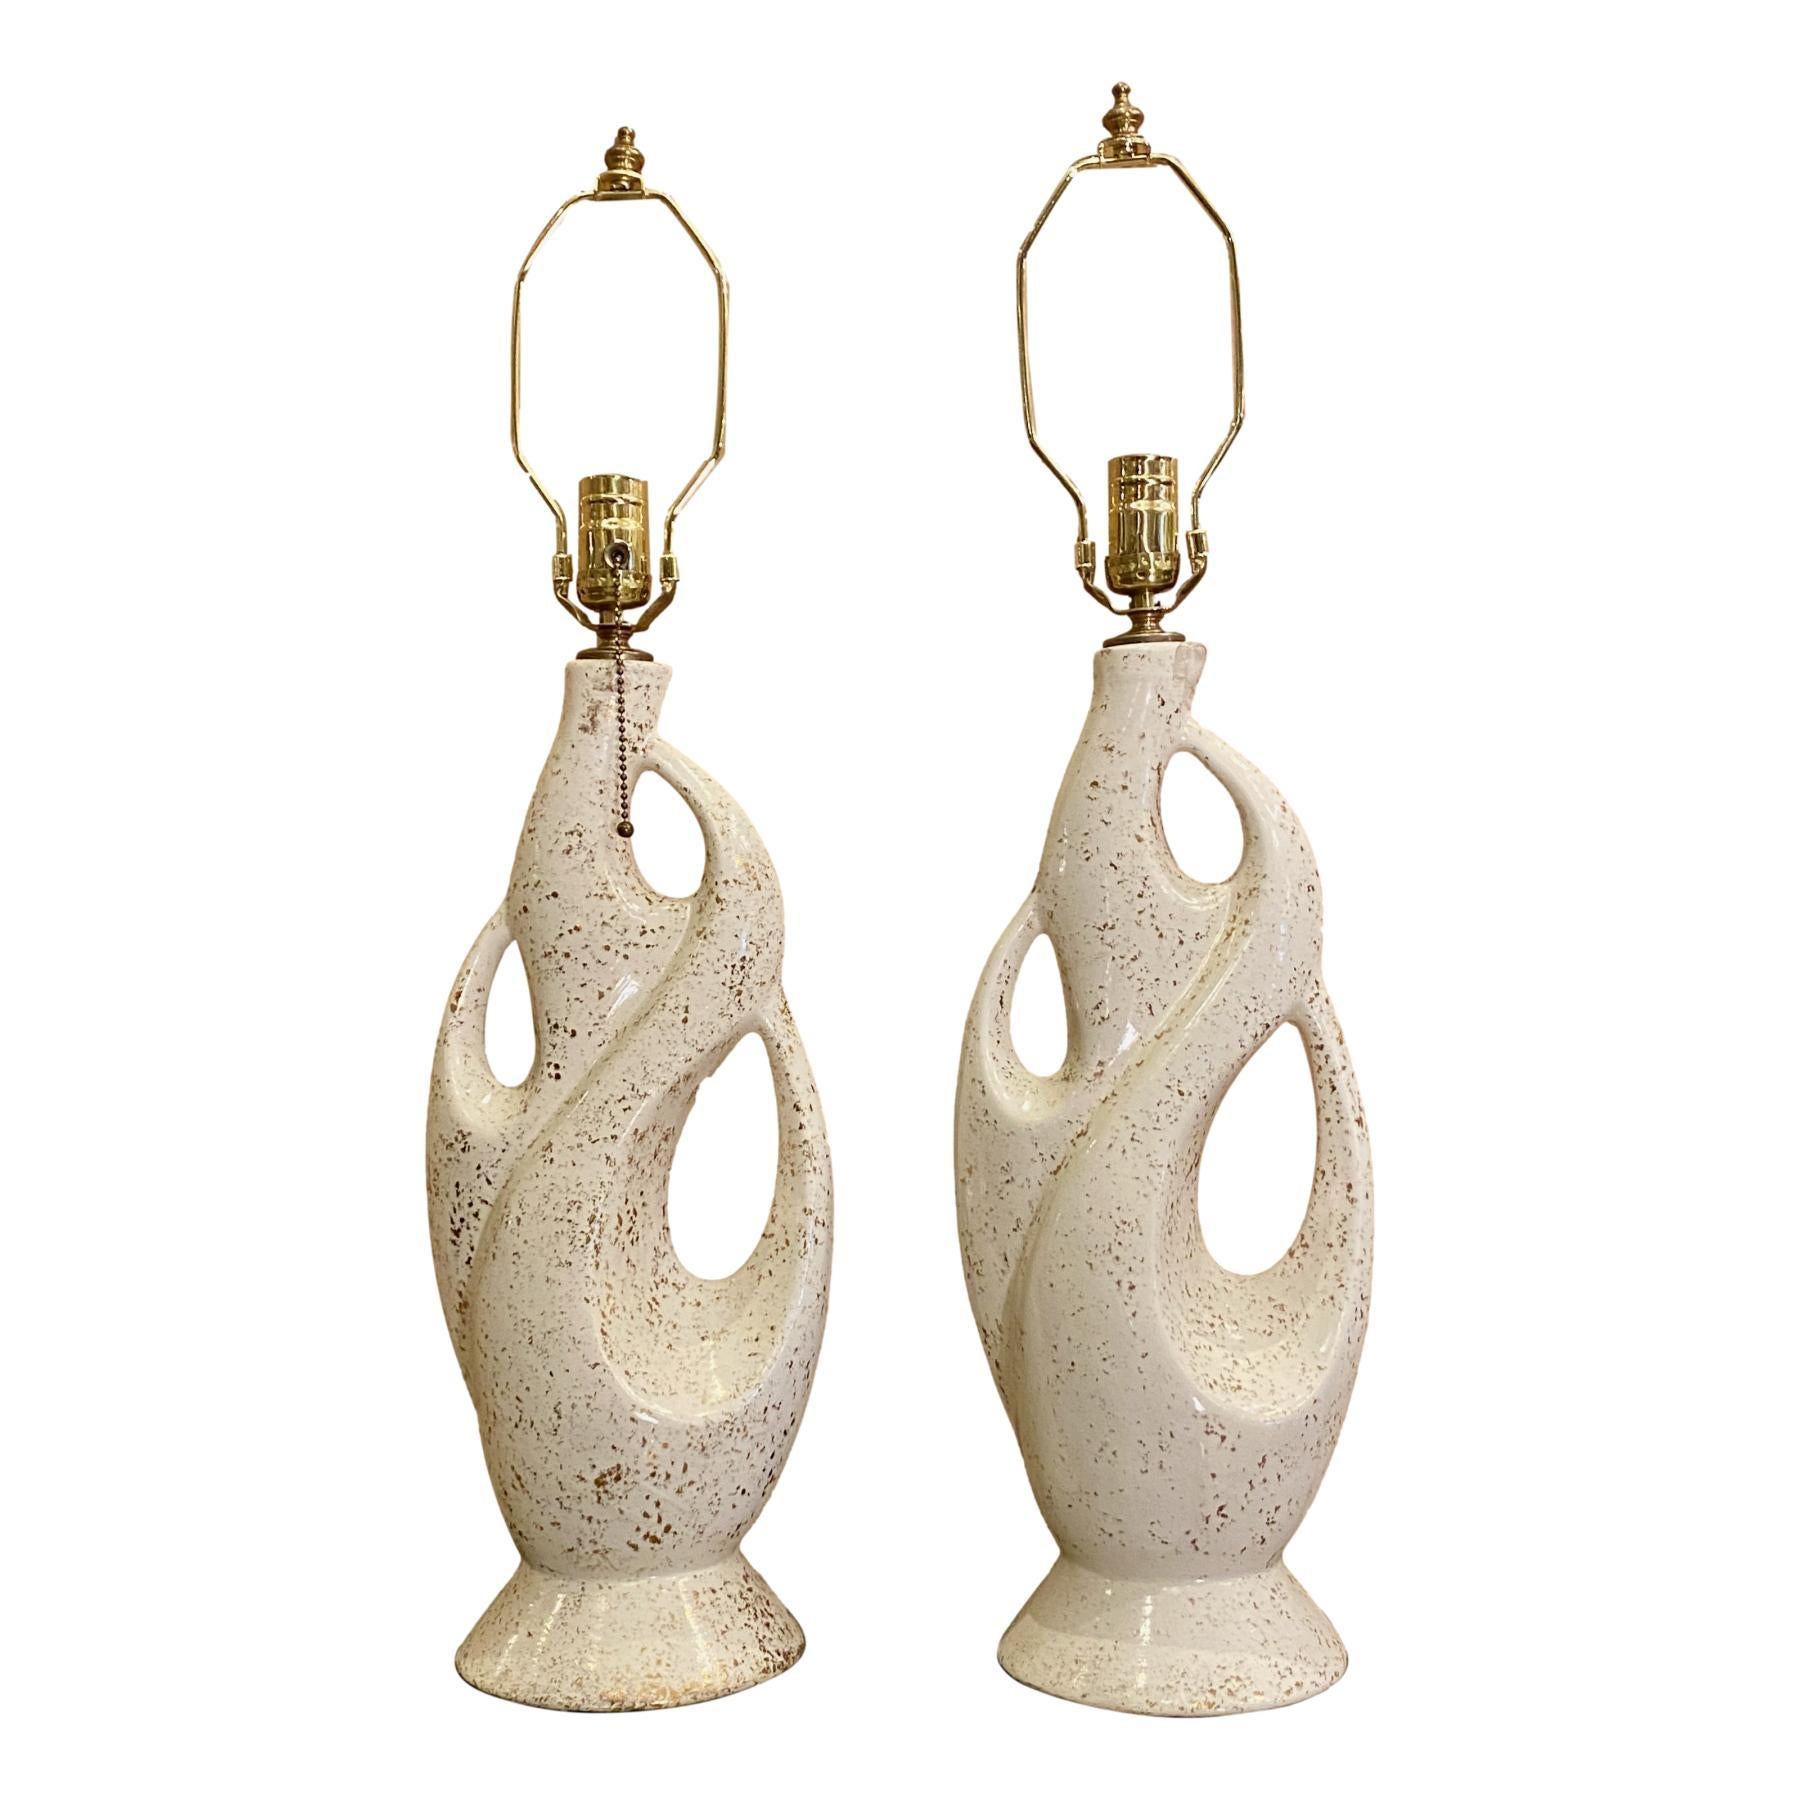 Pair of circa 1960’s Italian moderne style white porcelain lamps with gilt details.

Measurements:
Height of body: 19?
Height to shade rest: 27?
Diameter at widest: 8